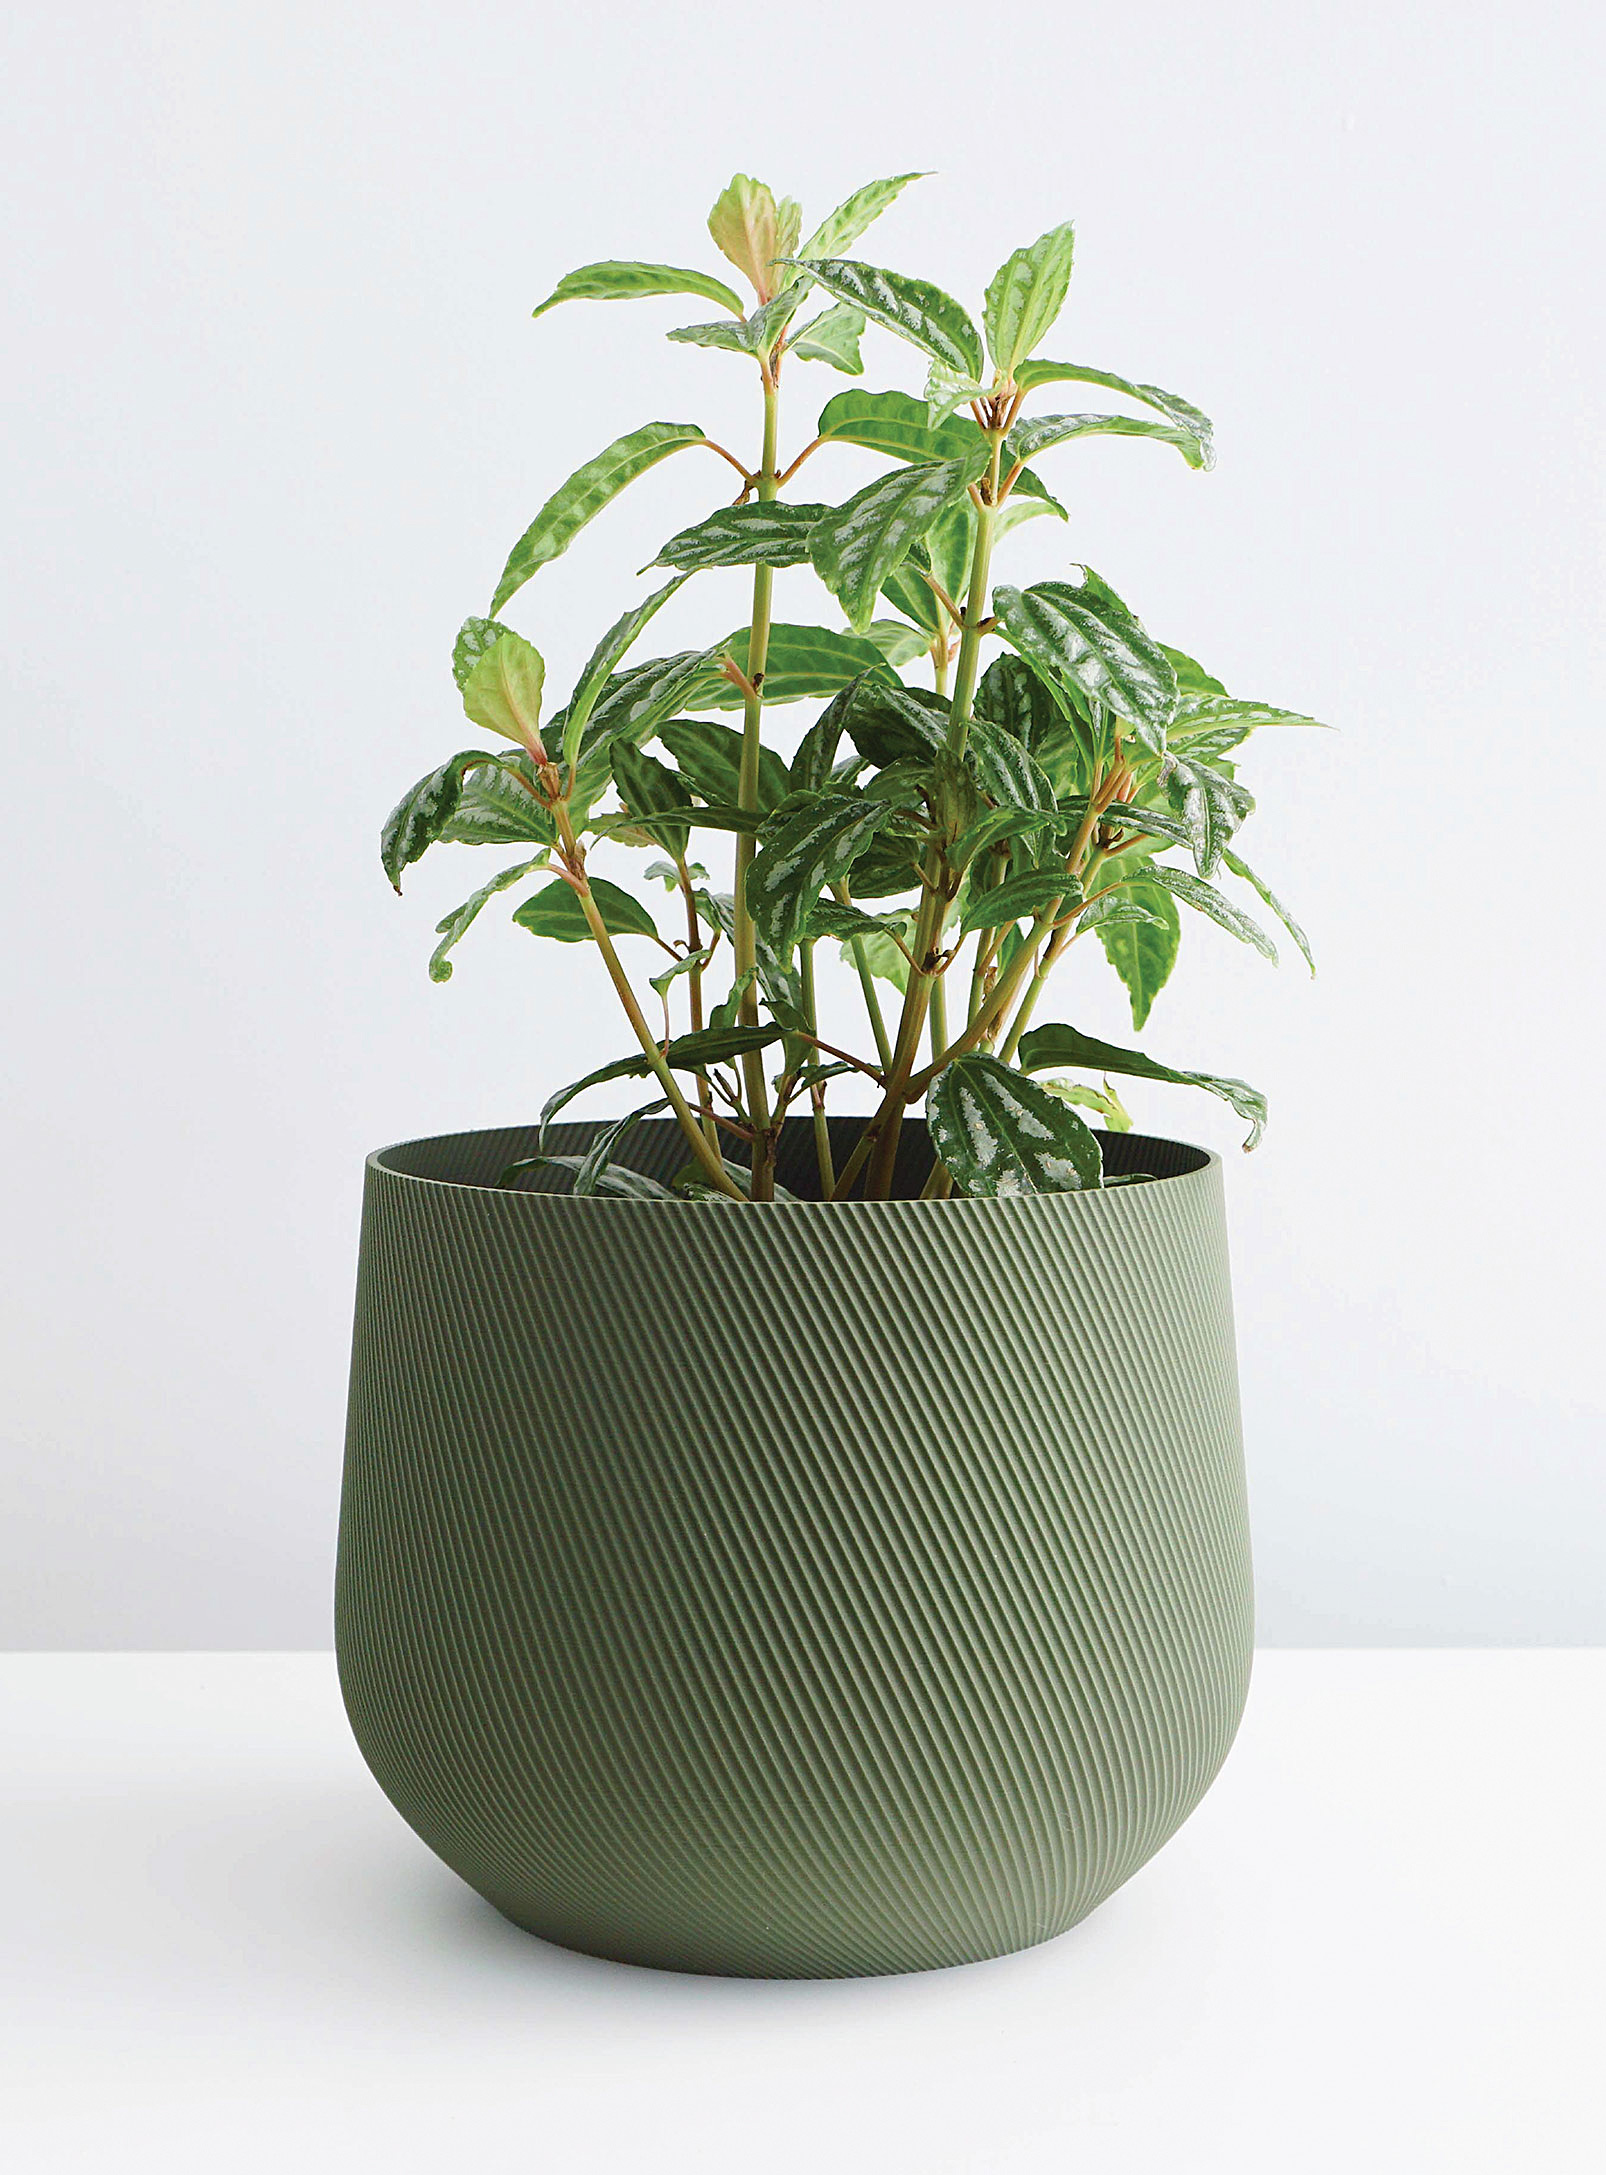 Conifer Homewares Juniper Plant-based Planter See Available Sizes In Mossy Green